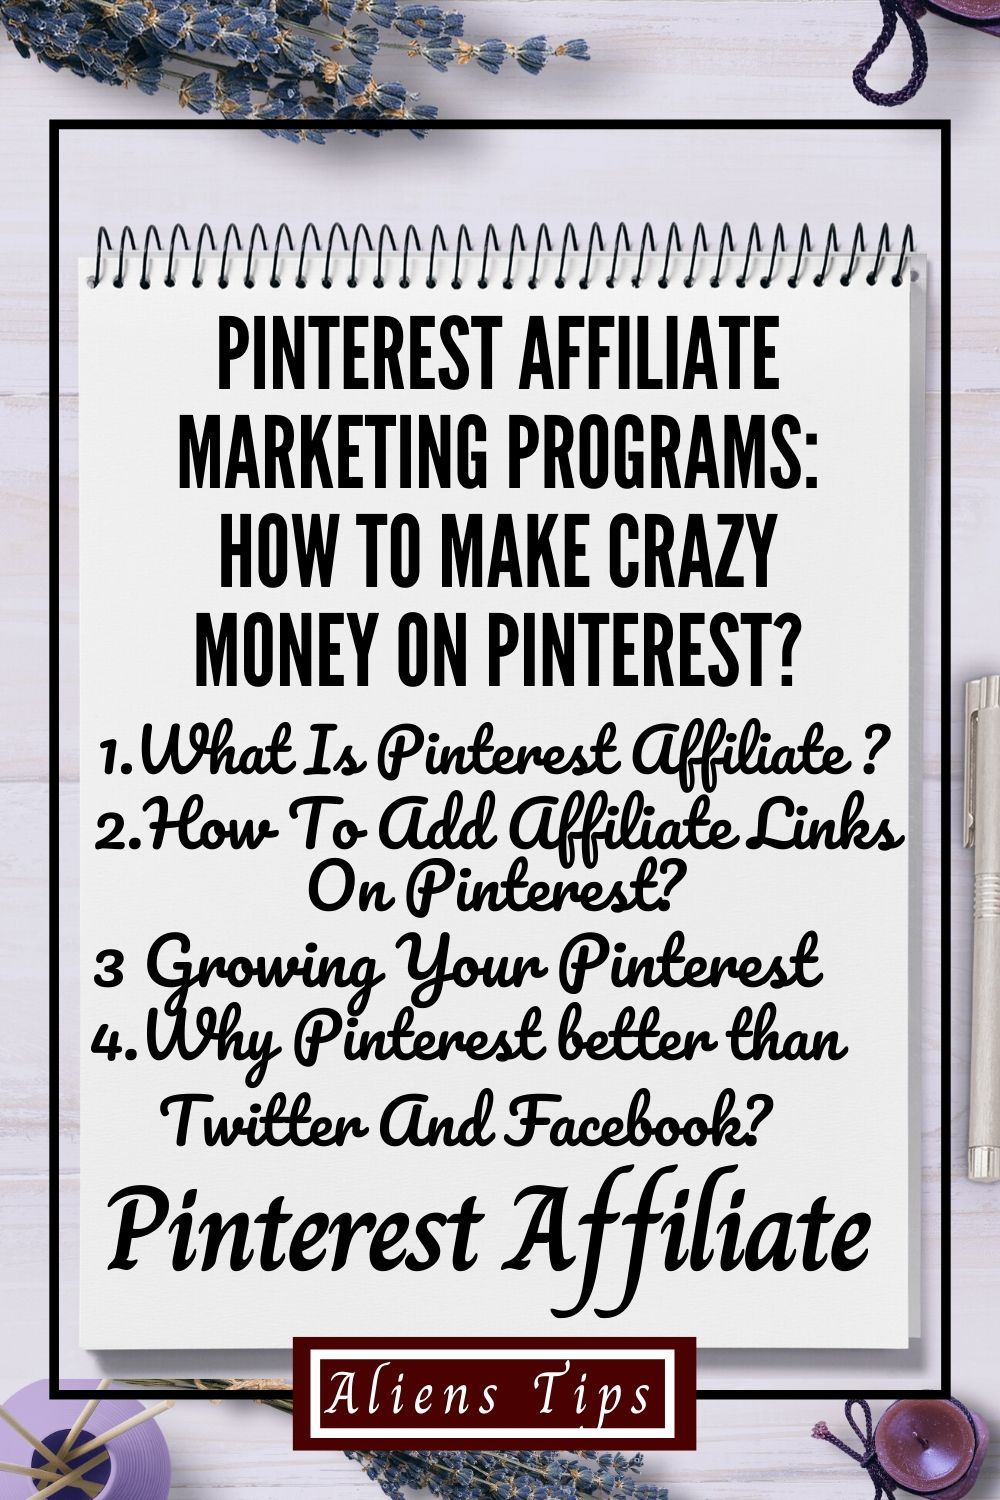 Pinterest Affiliate Marketing Programs: How To Make Crazy Money On Pinterest? Aliens Tips What Is Pinterest Affiliate Marketing? How To Add Affiliate Links On Pinterest? Ideas & Best Practices For Pinterest Affiliate Marketing 1. Recommend Relevant Products 2. Test Linking To Buying Guides Or Reviews 3. Disclose Affiliate Relations & Avoid Link Cloaking Growing Your Pinterest Step 1: Create 8-10 Boards & Start Pinning Step 2. Start Gaining Followers Step 3. Scale Pinterest Why Should You Choose Pinterest Over Other Networks? Why Pinterest Over Twitter And Facebook? Your Pinterest Affiliate Marketing Programs Campaign